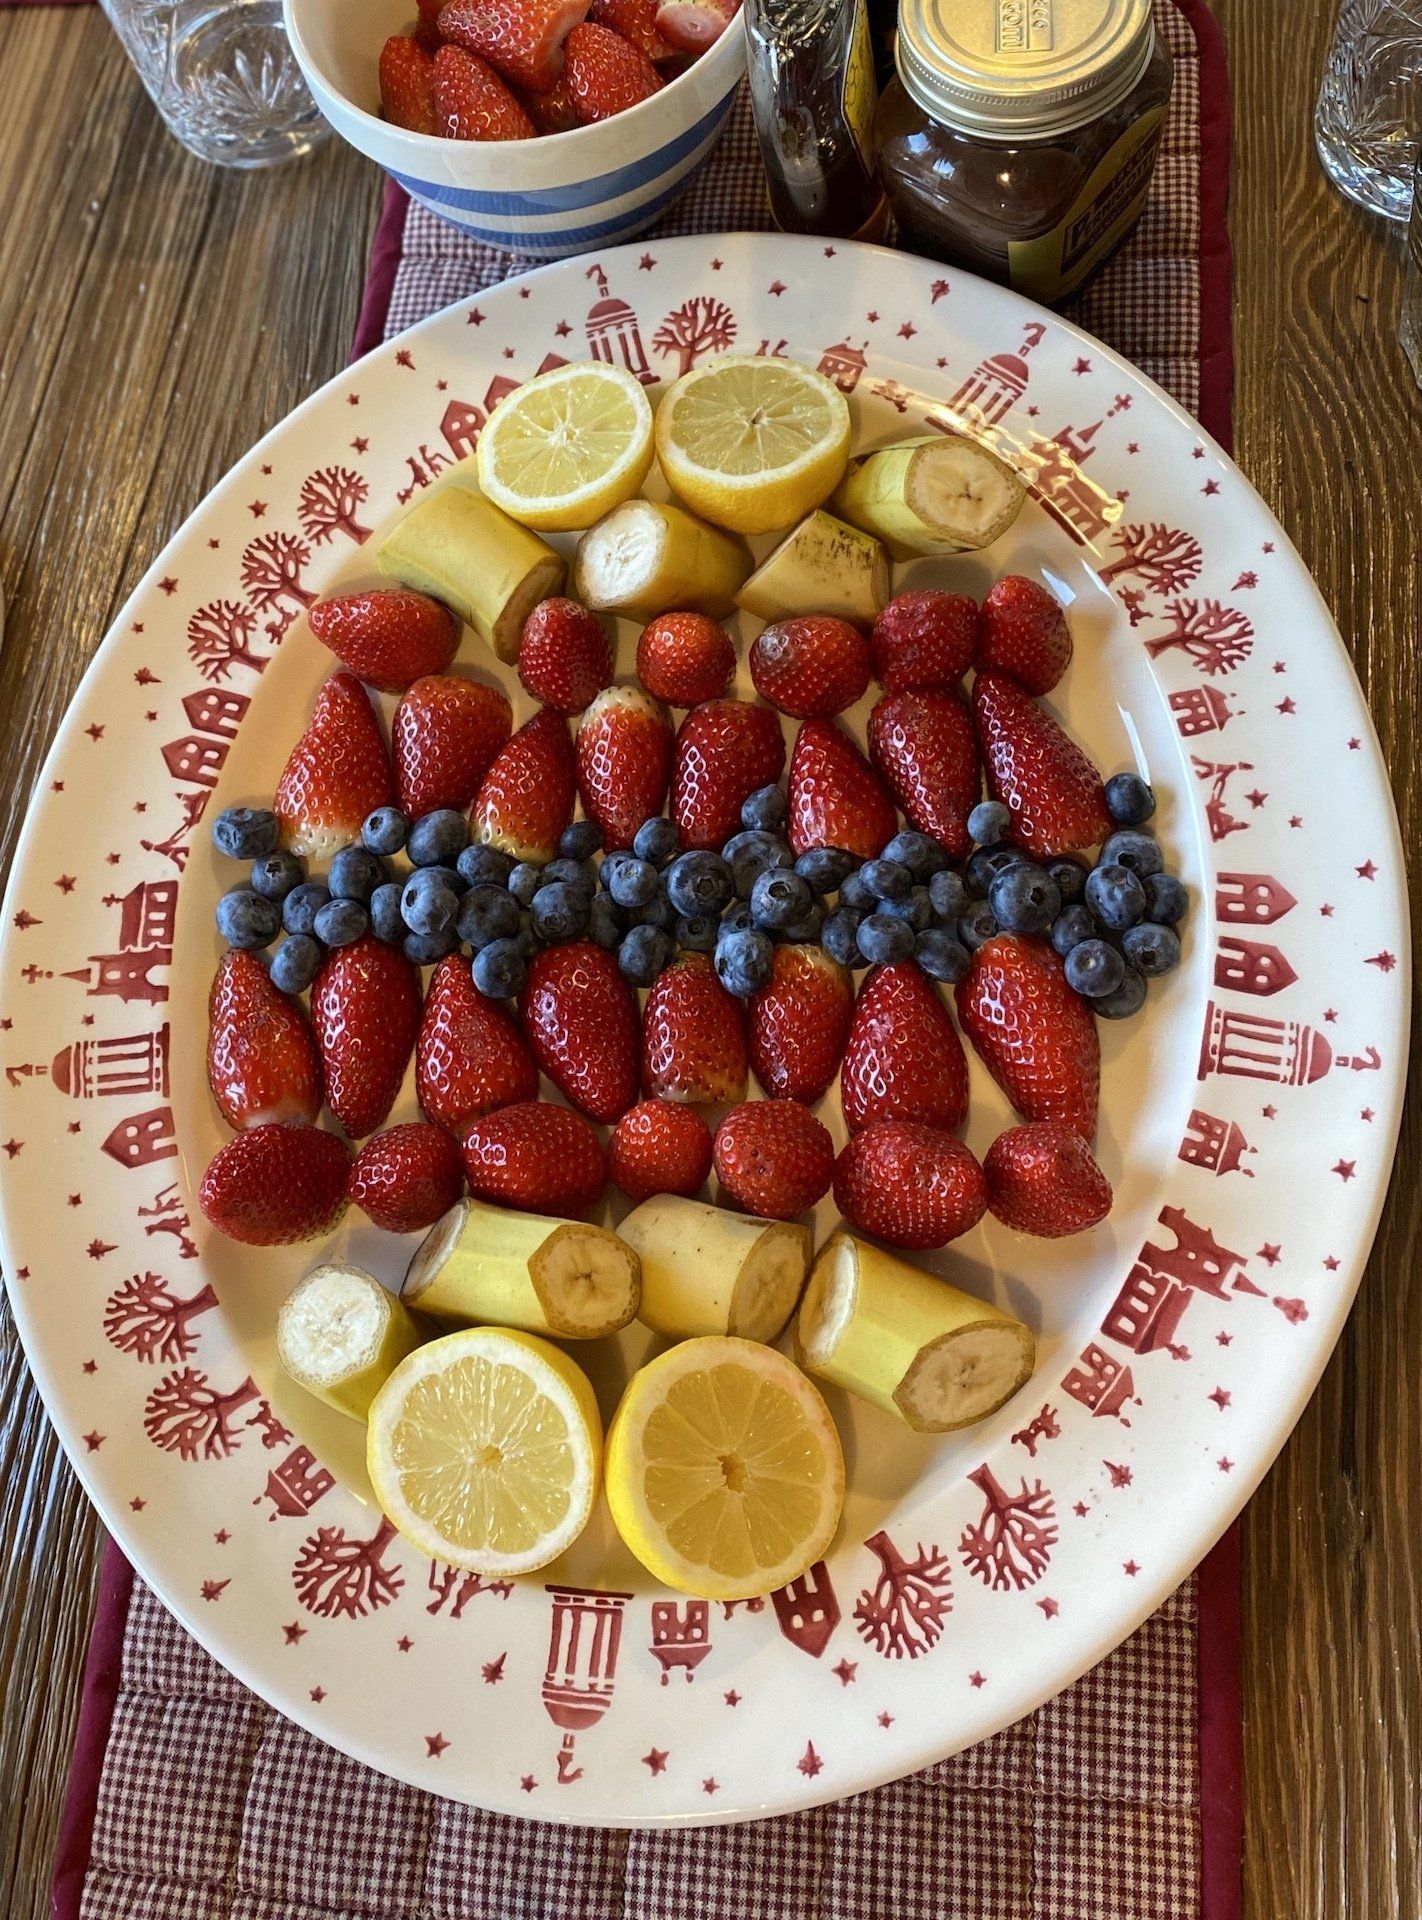 Chalet Marmotte - Fruit for Pancakes!